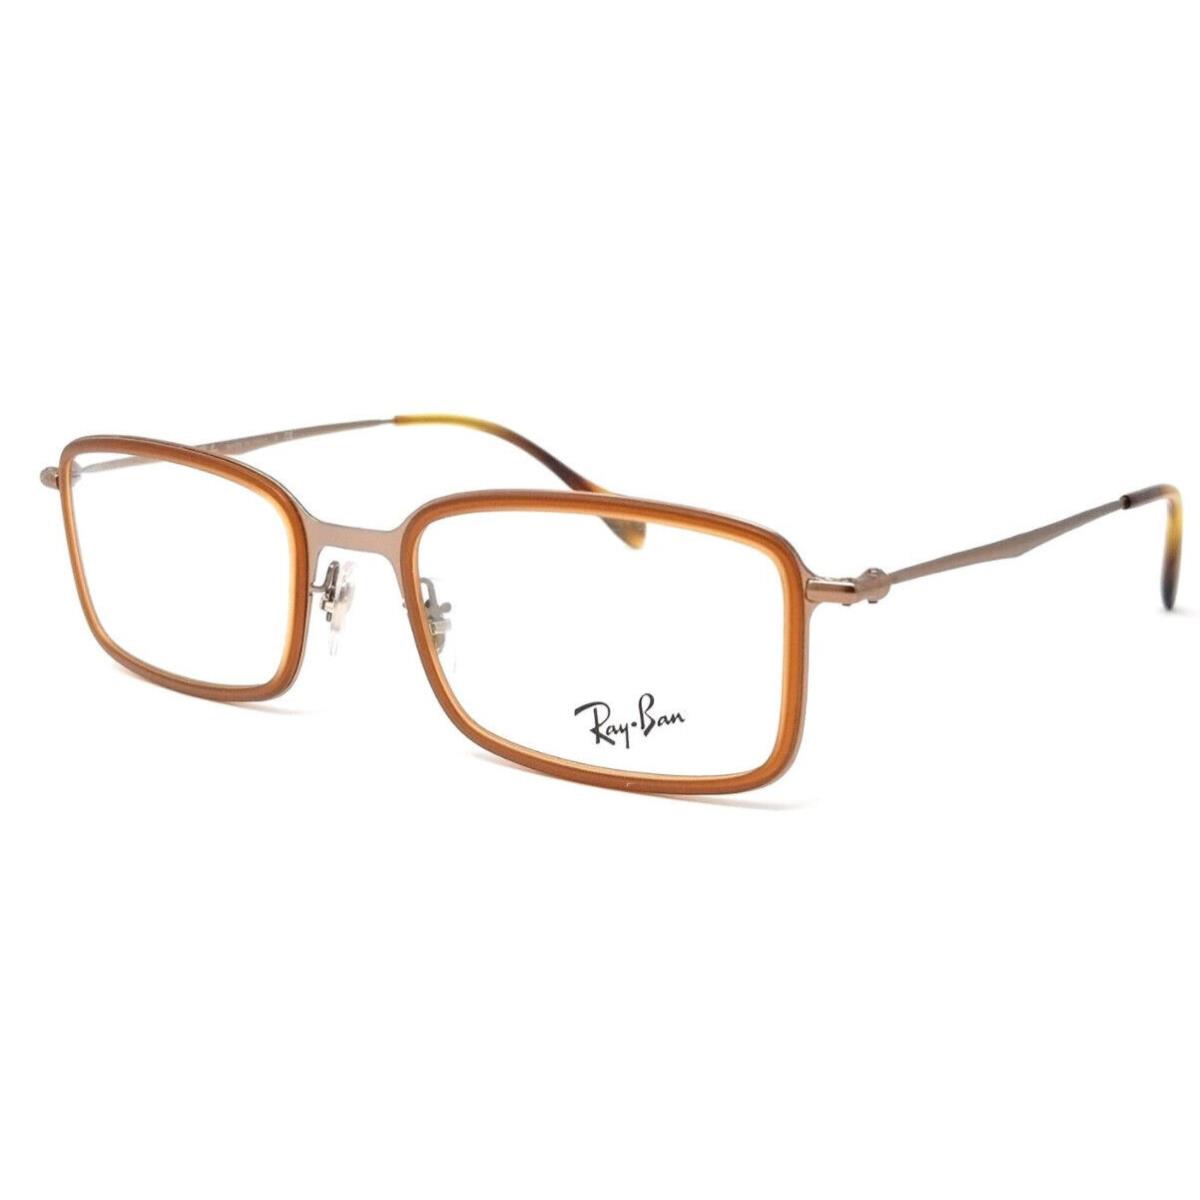 Ray Ban RB 6298 2811 Brown Unisex Eyeglasses 53mm 19 145 Italy